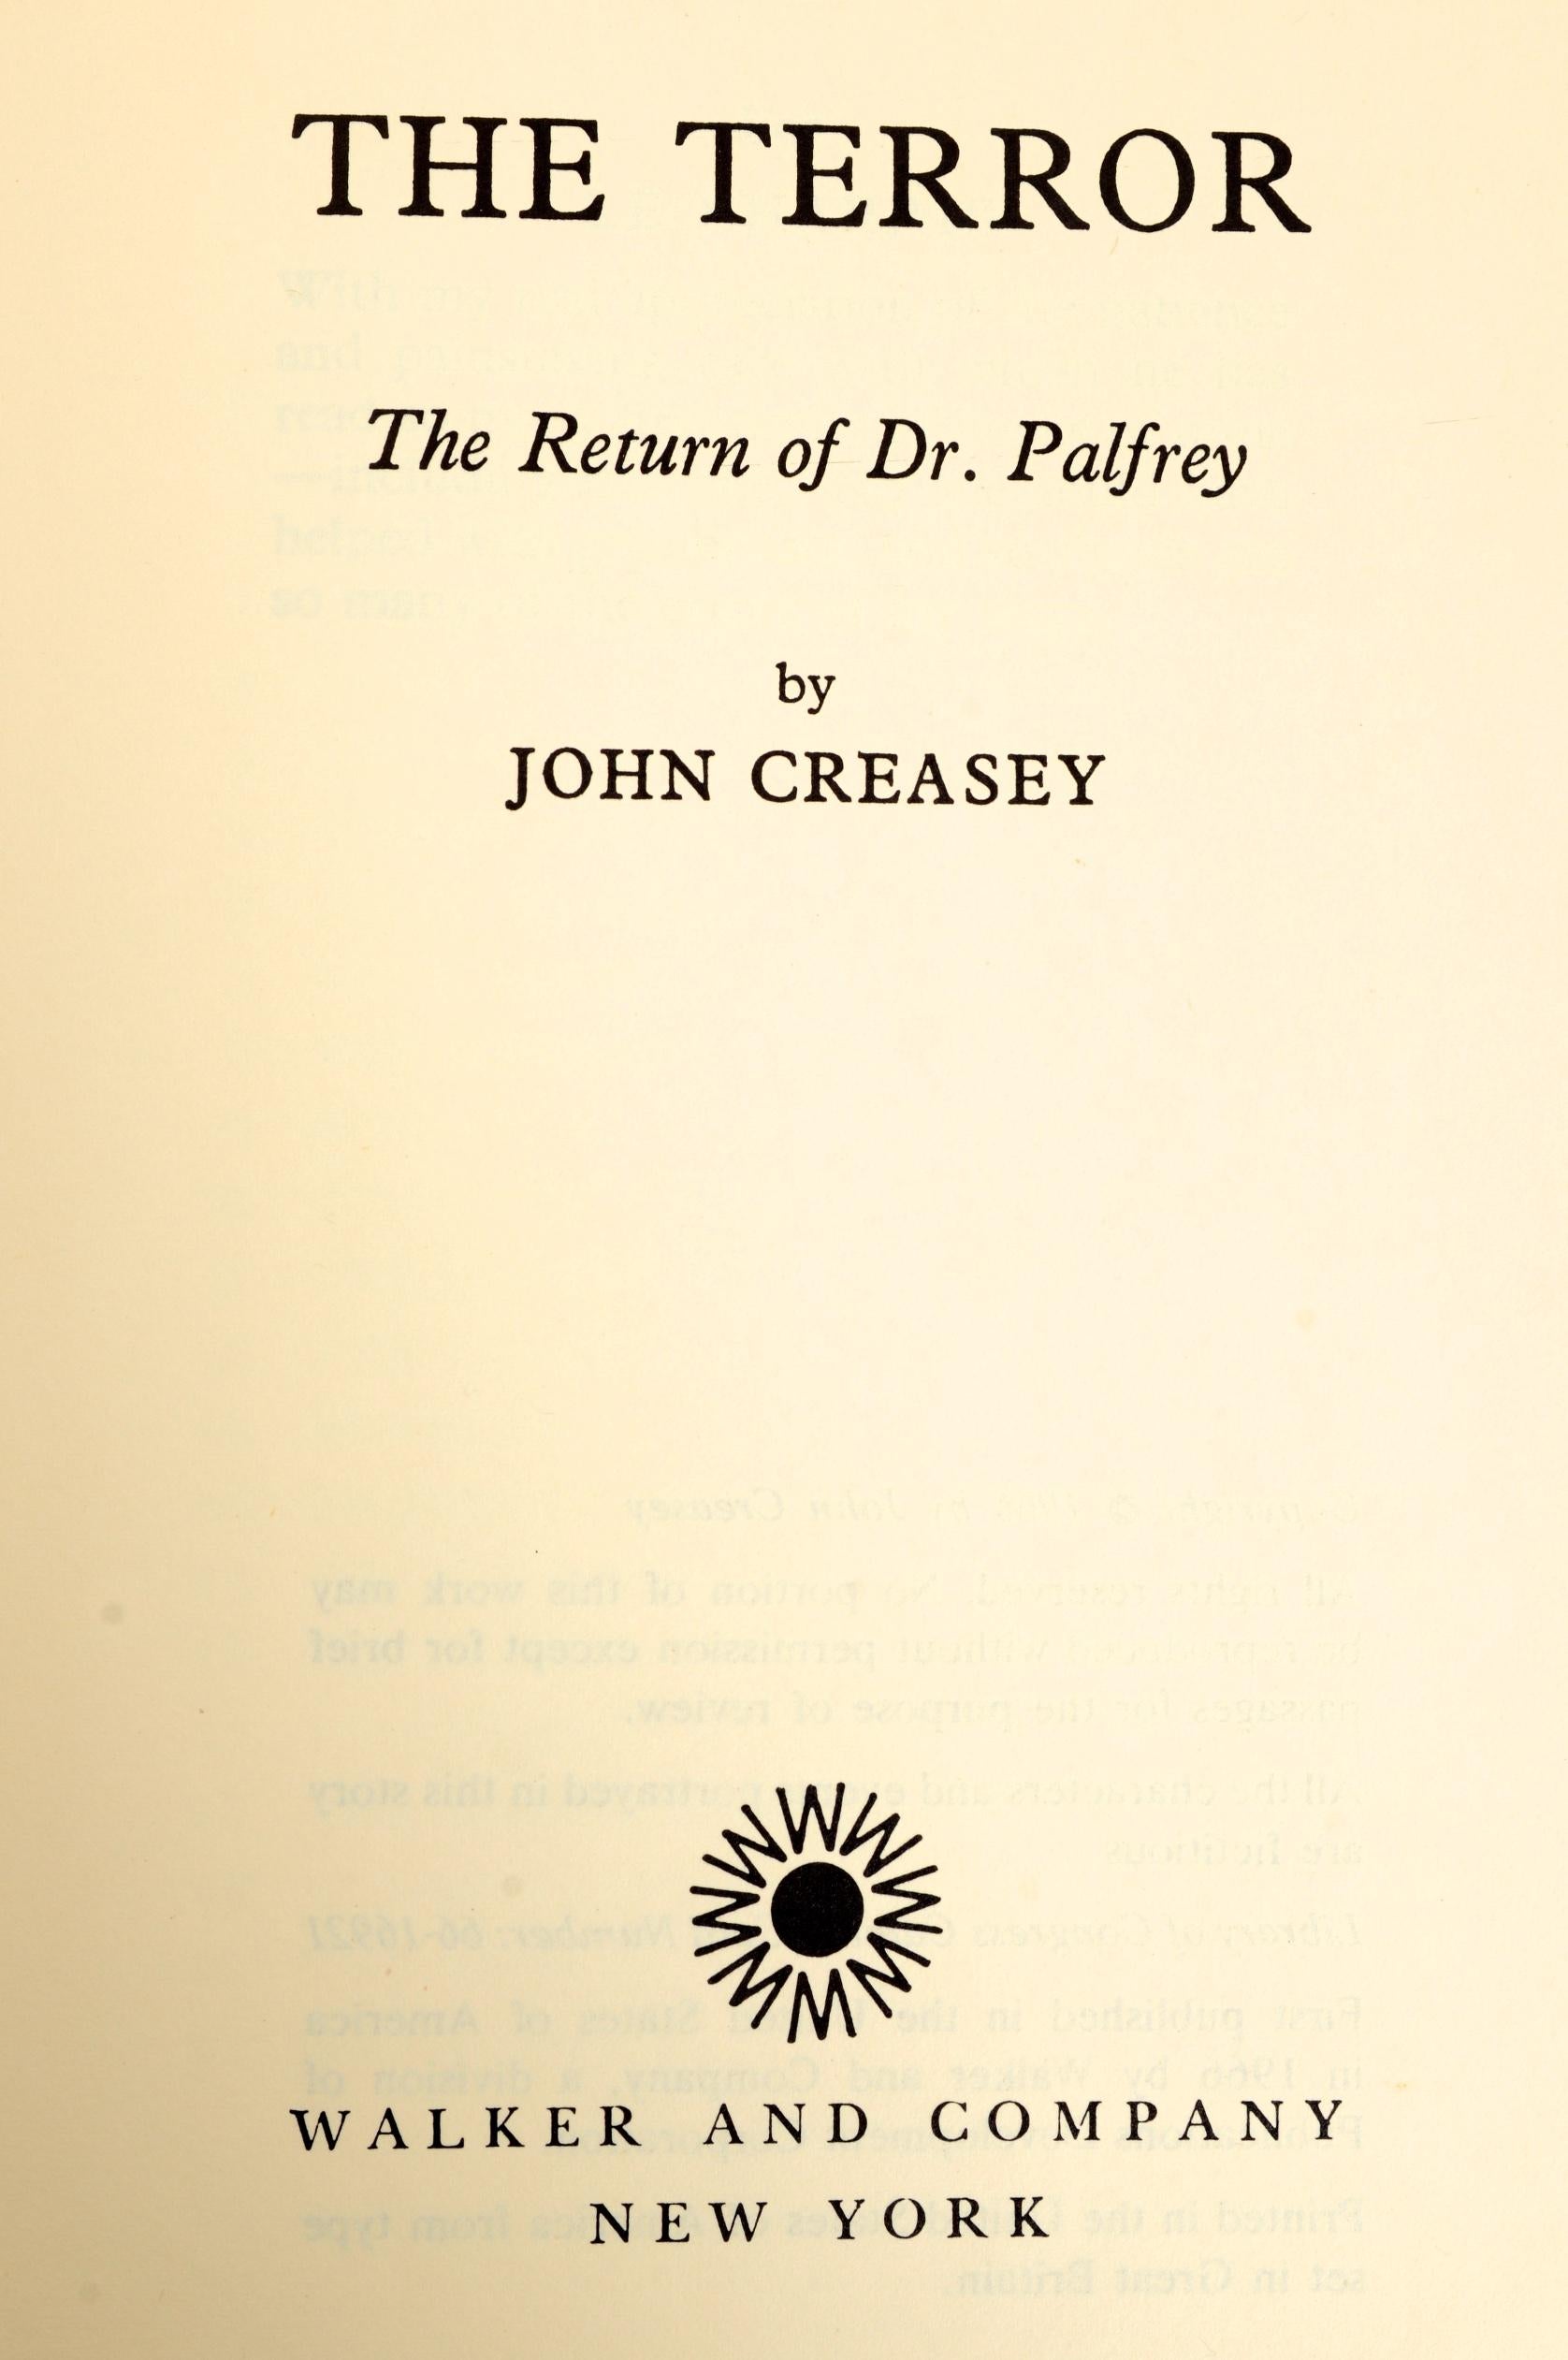 The Terror : The Return of Dr Palfrey by John Creasey. Walker and Company 1966, New York. 1st Ed hardcover. The story of the near-panic that strikes the world's governments when an unidentified object carrying a super-powerful nuclear war-head